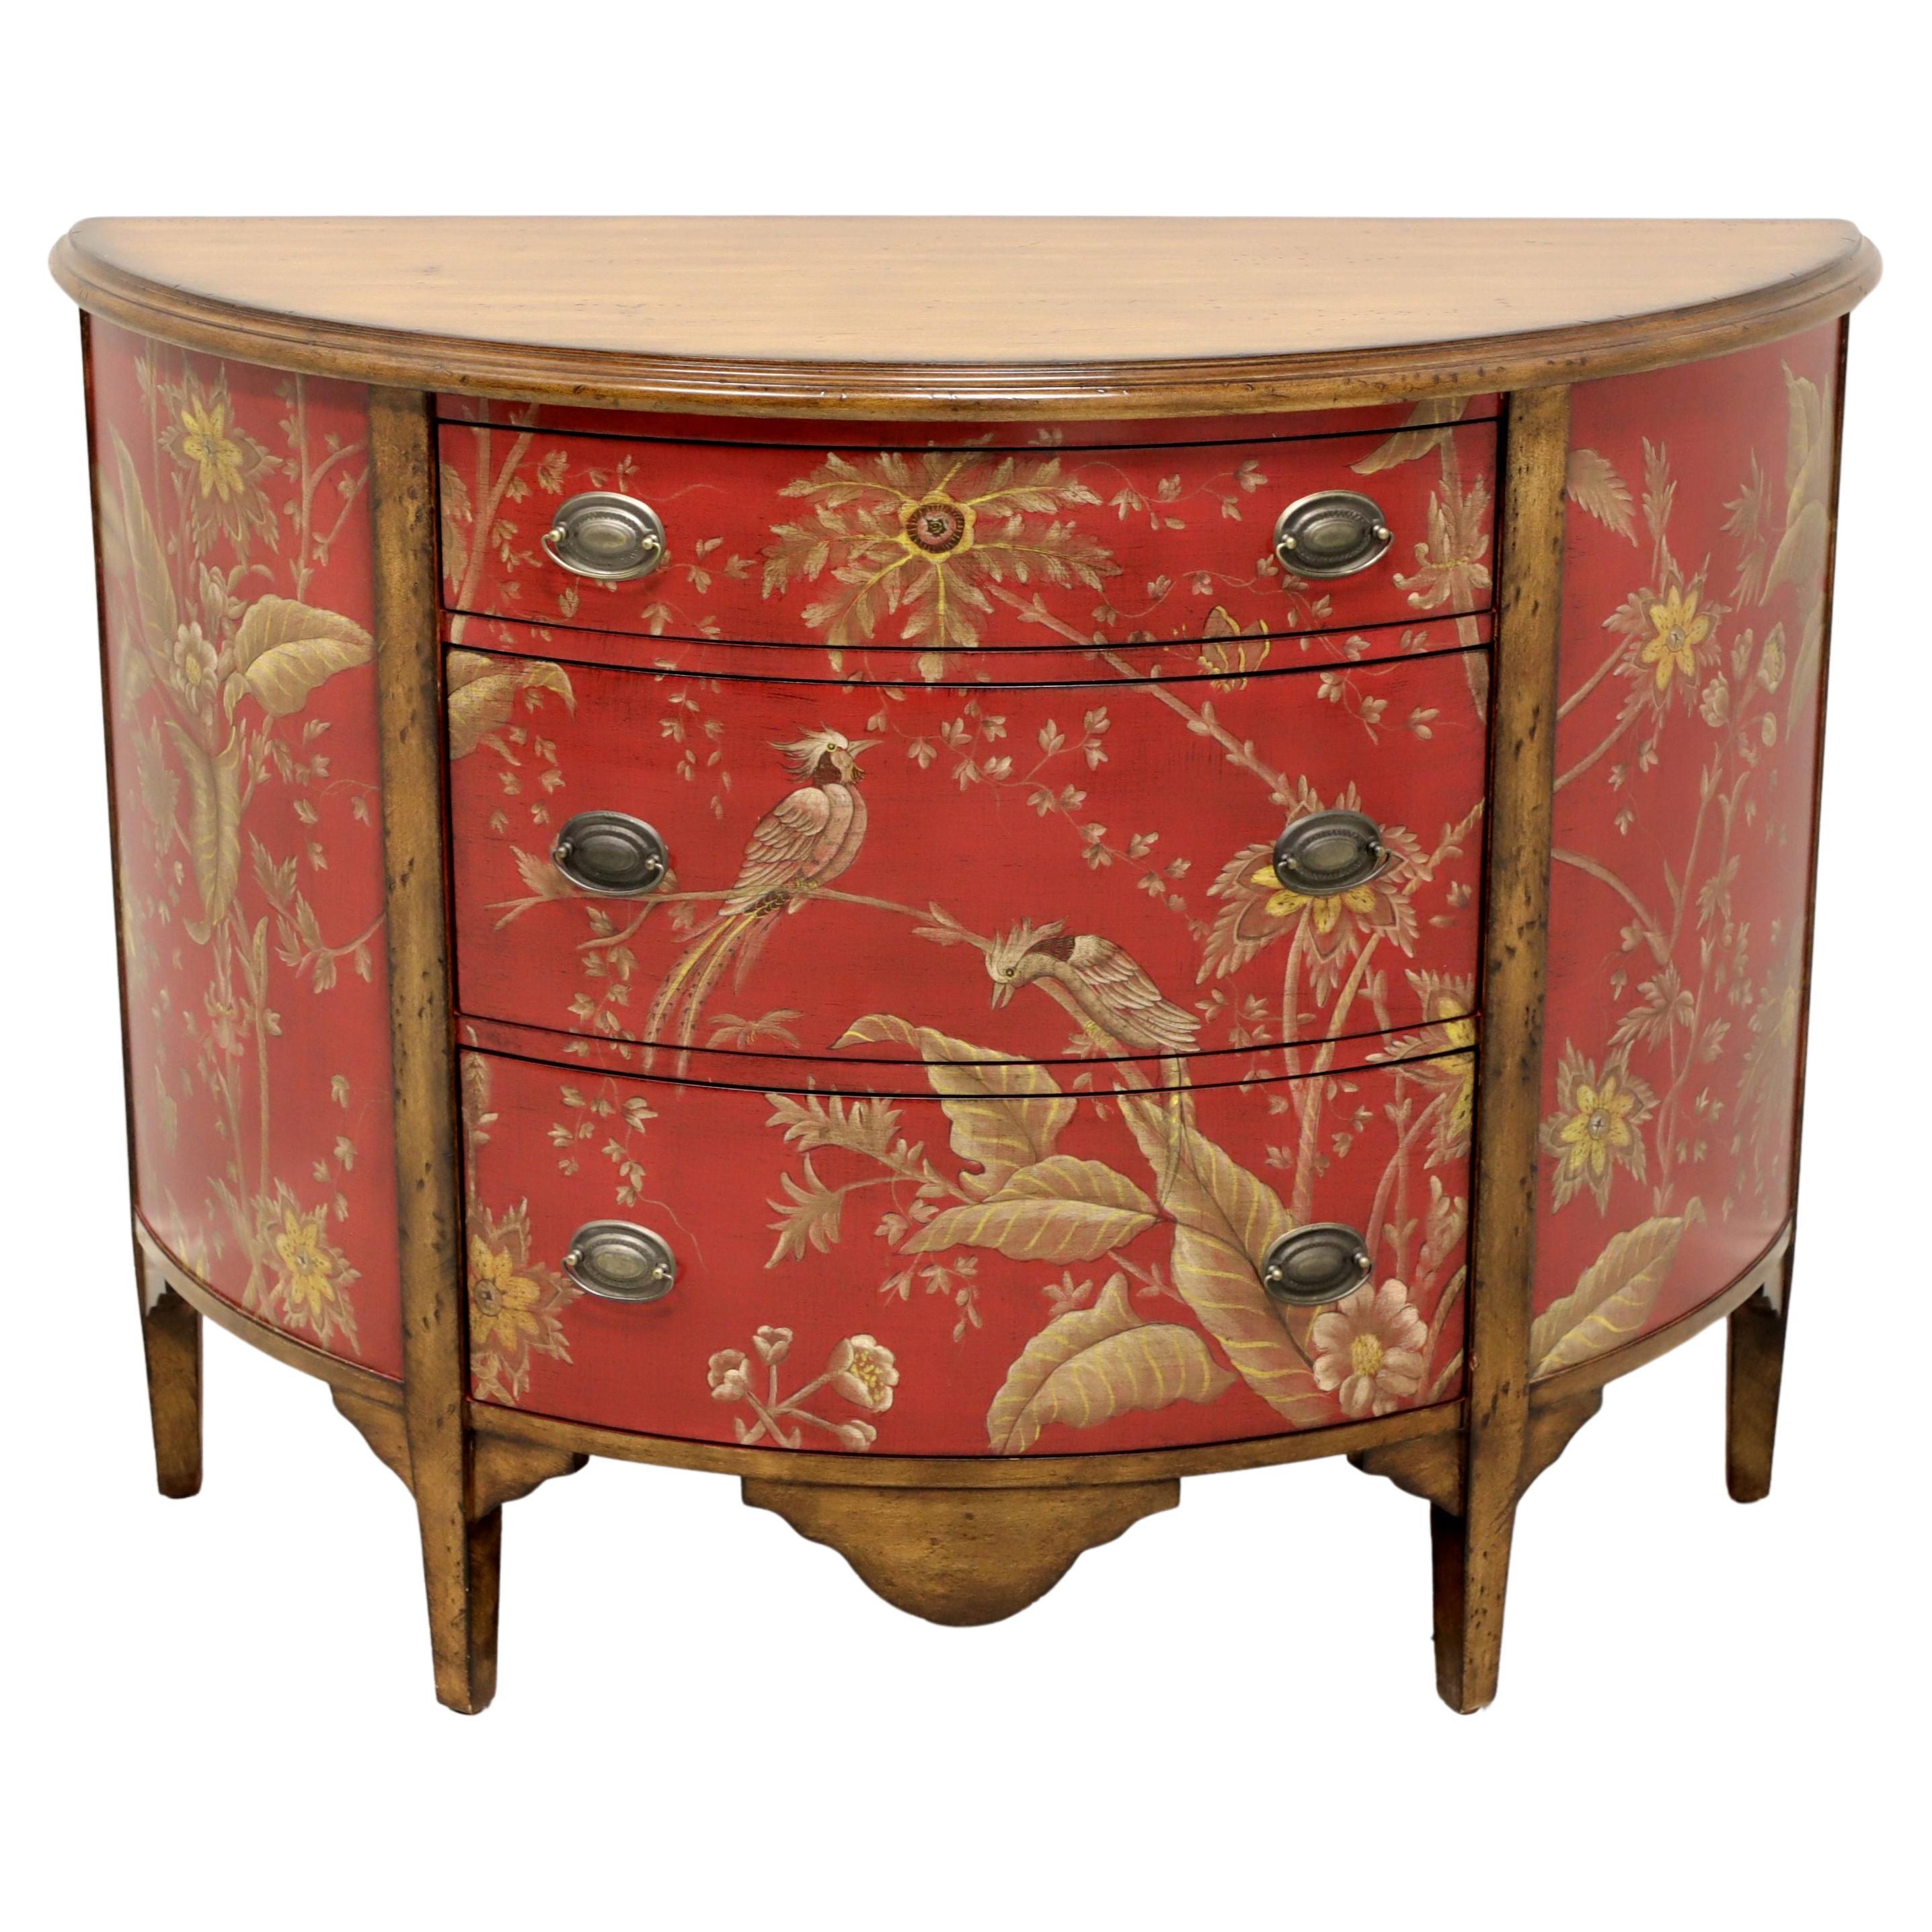 Late 20th Century Red Painted with Foliate & Avian Themes Demilune Commode Chest